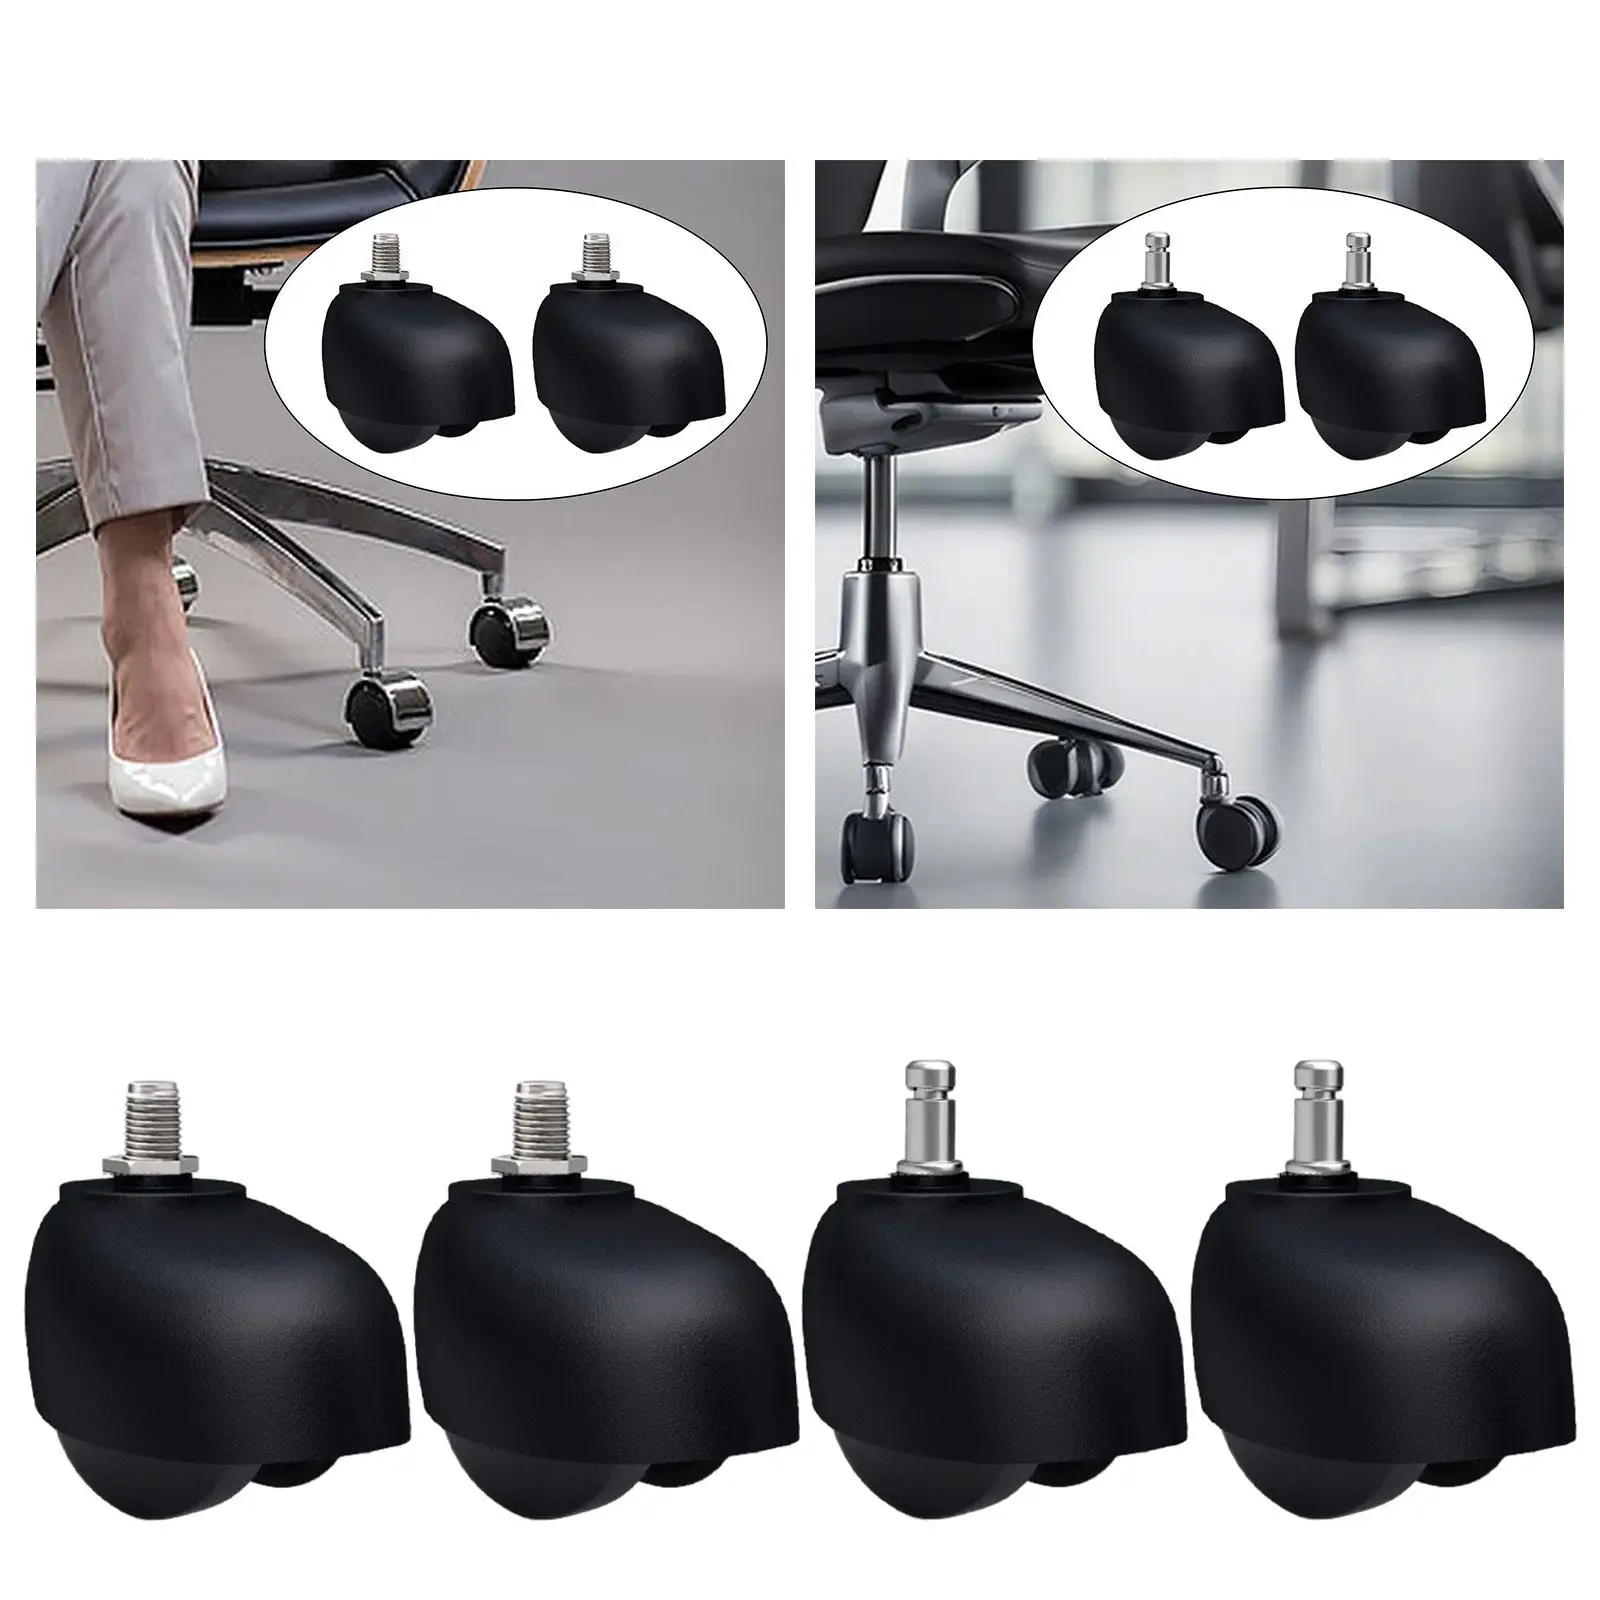 2x Replacement Office Chair Wheels Universal Computer Chair Wheels Chair Casters for Desk Chairs Computer Chairs Gaming Chairs